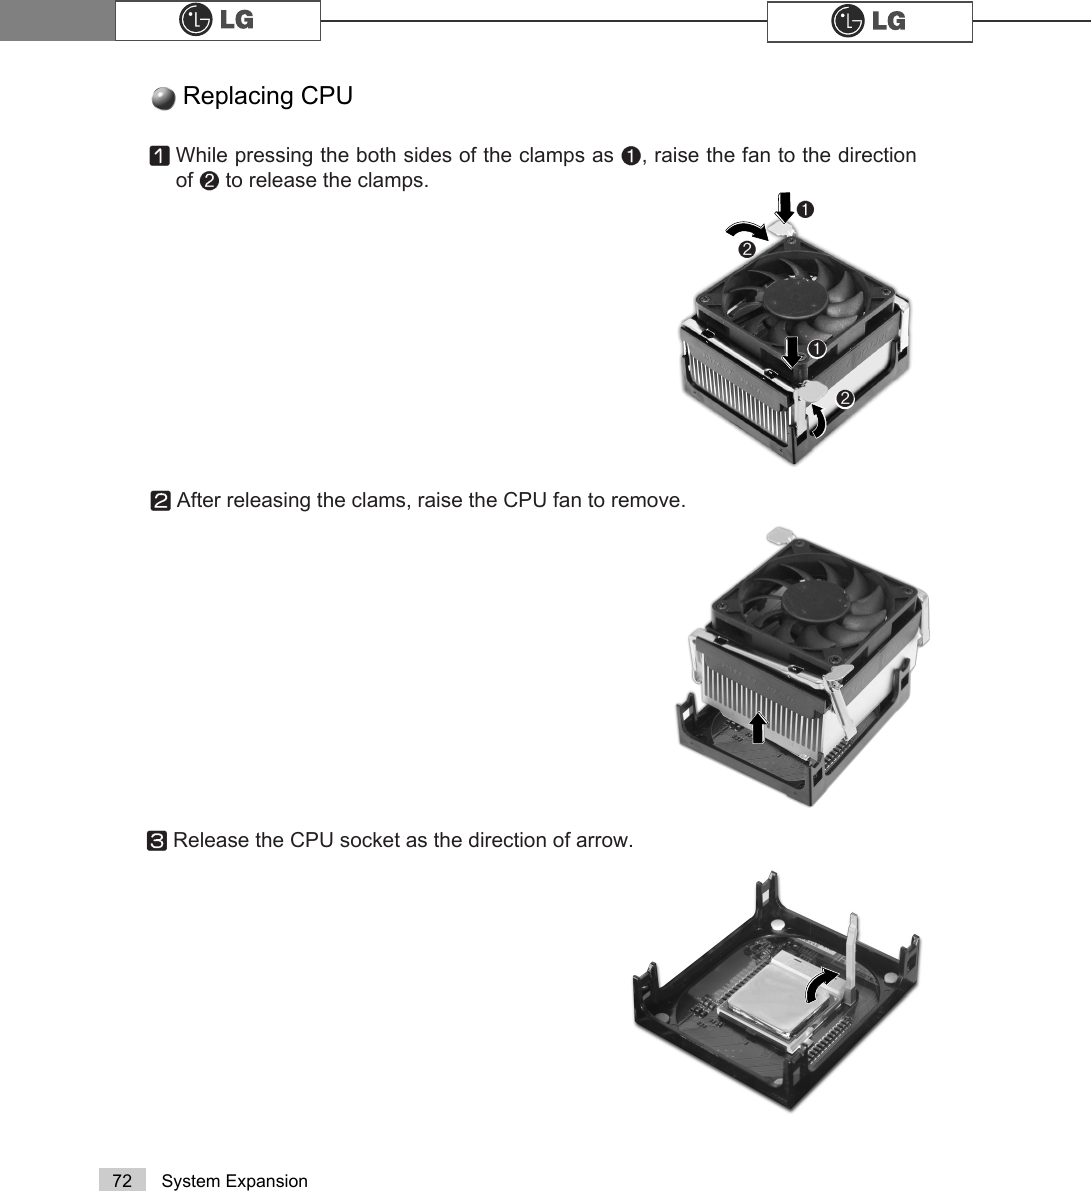 72 System ExpansionReplacing CPU ℘℘ℙℙⓞWhile pressing the both sides of the clamps as ℘, raise the fan to the directionof ℙto release the clamps.ⓟAfter releasing the clams, raise the CPU fan to remove.ⓠRelease the CPU socket as the direction of arrow.